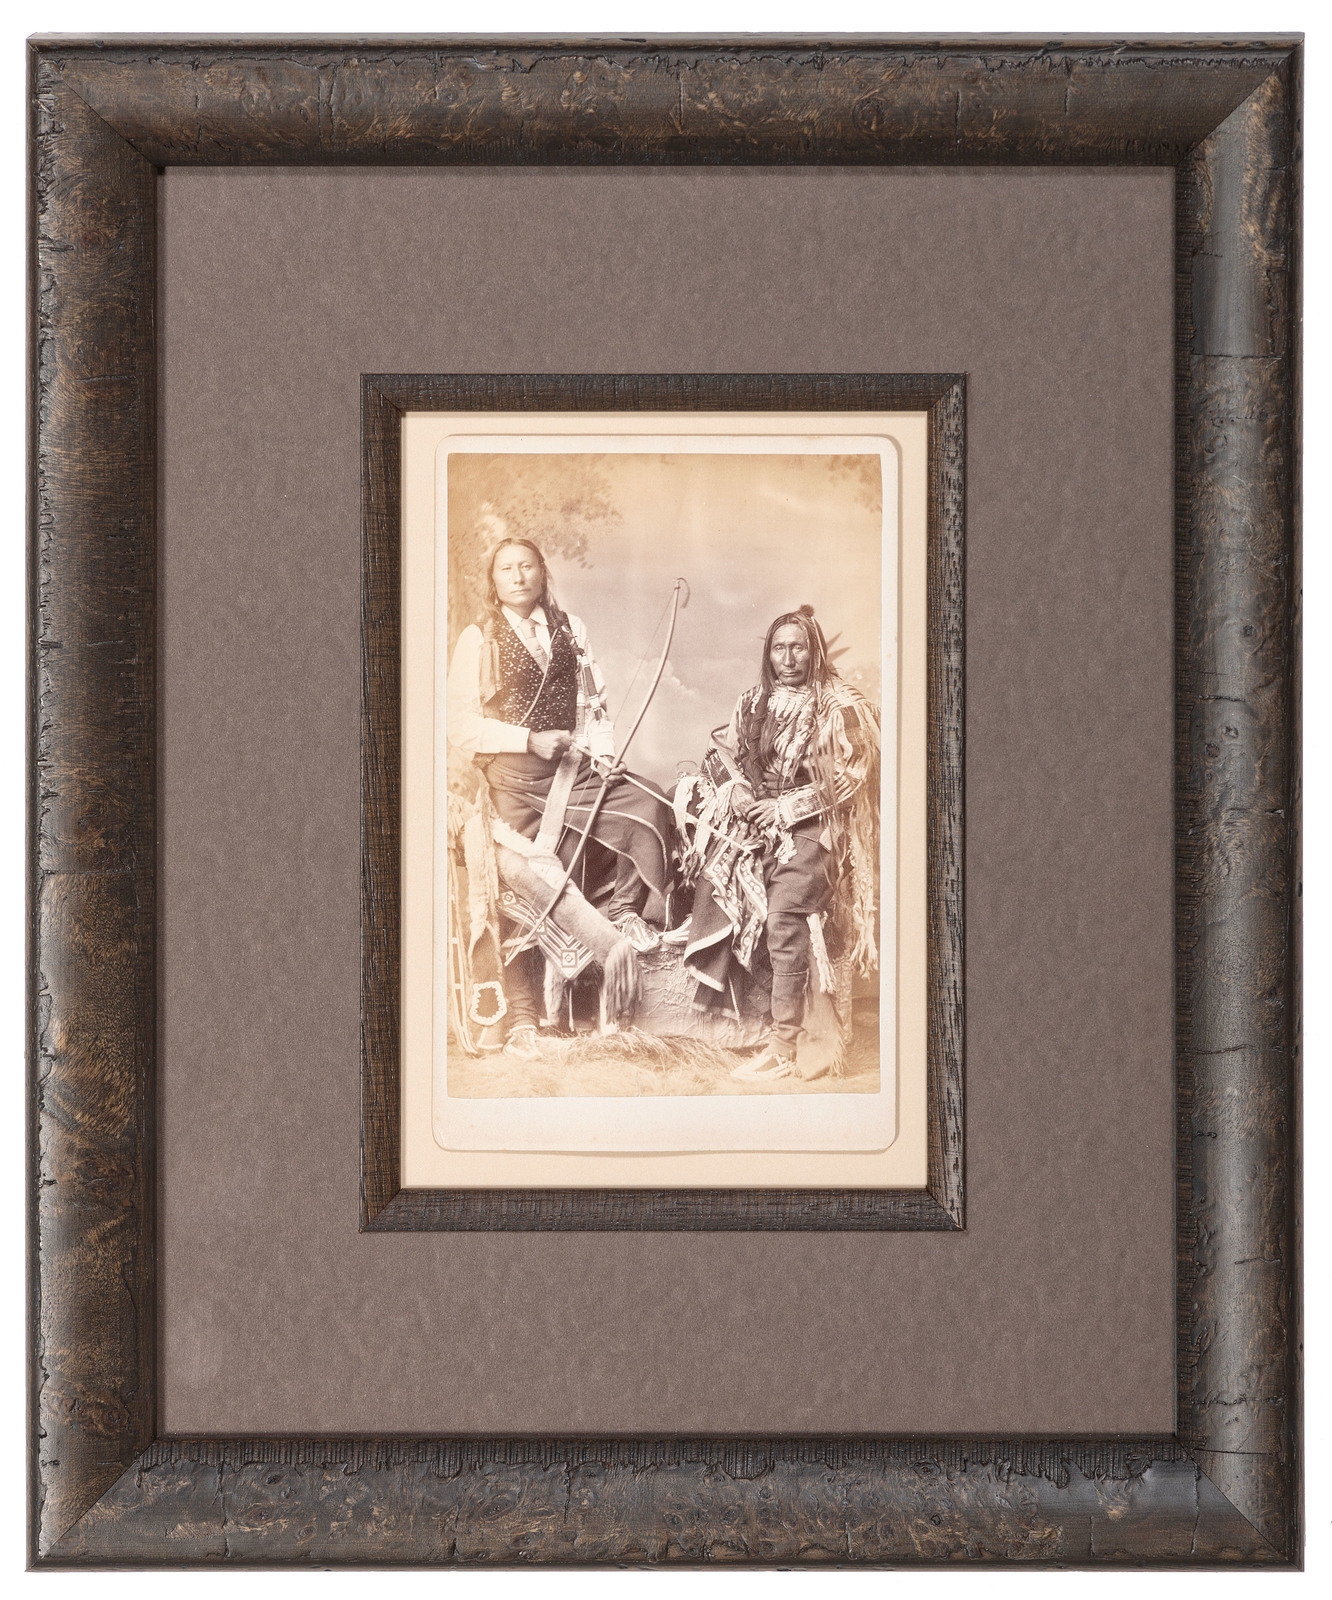 Cabinet card featuring Cheyenne Chiefs Man-on-the-Cloud and Mad Wolf by John Nicholas Choate, circa 1880